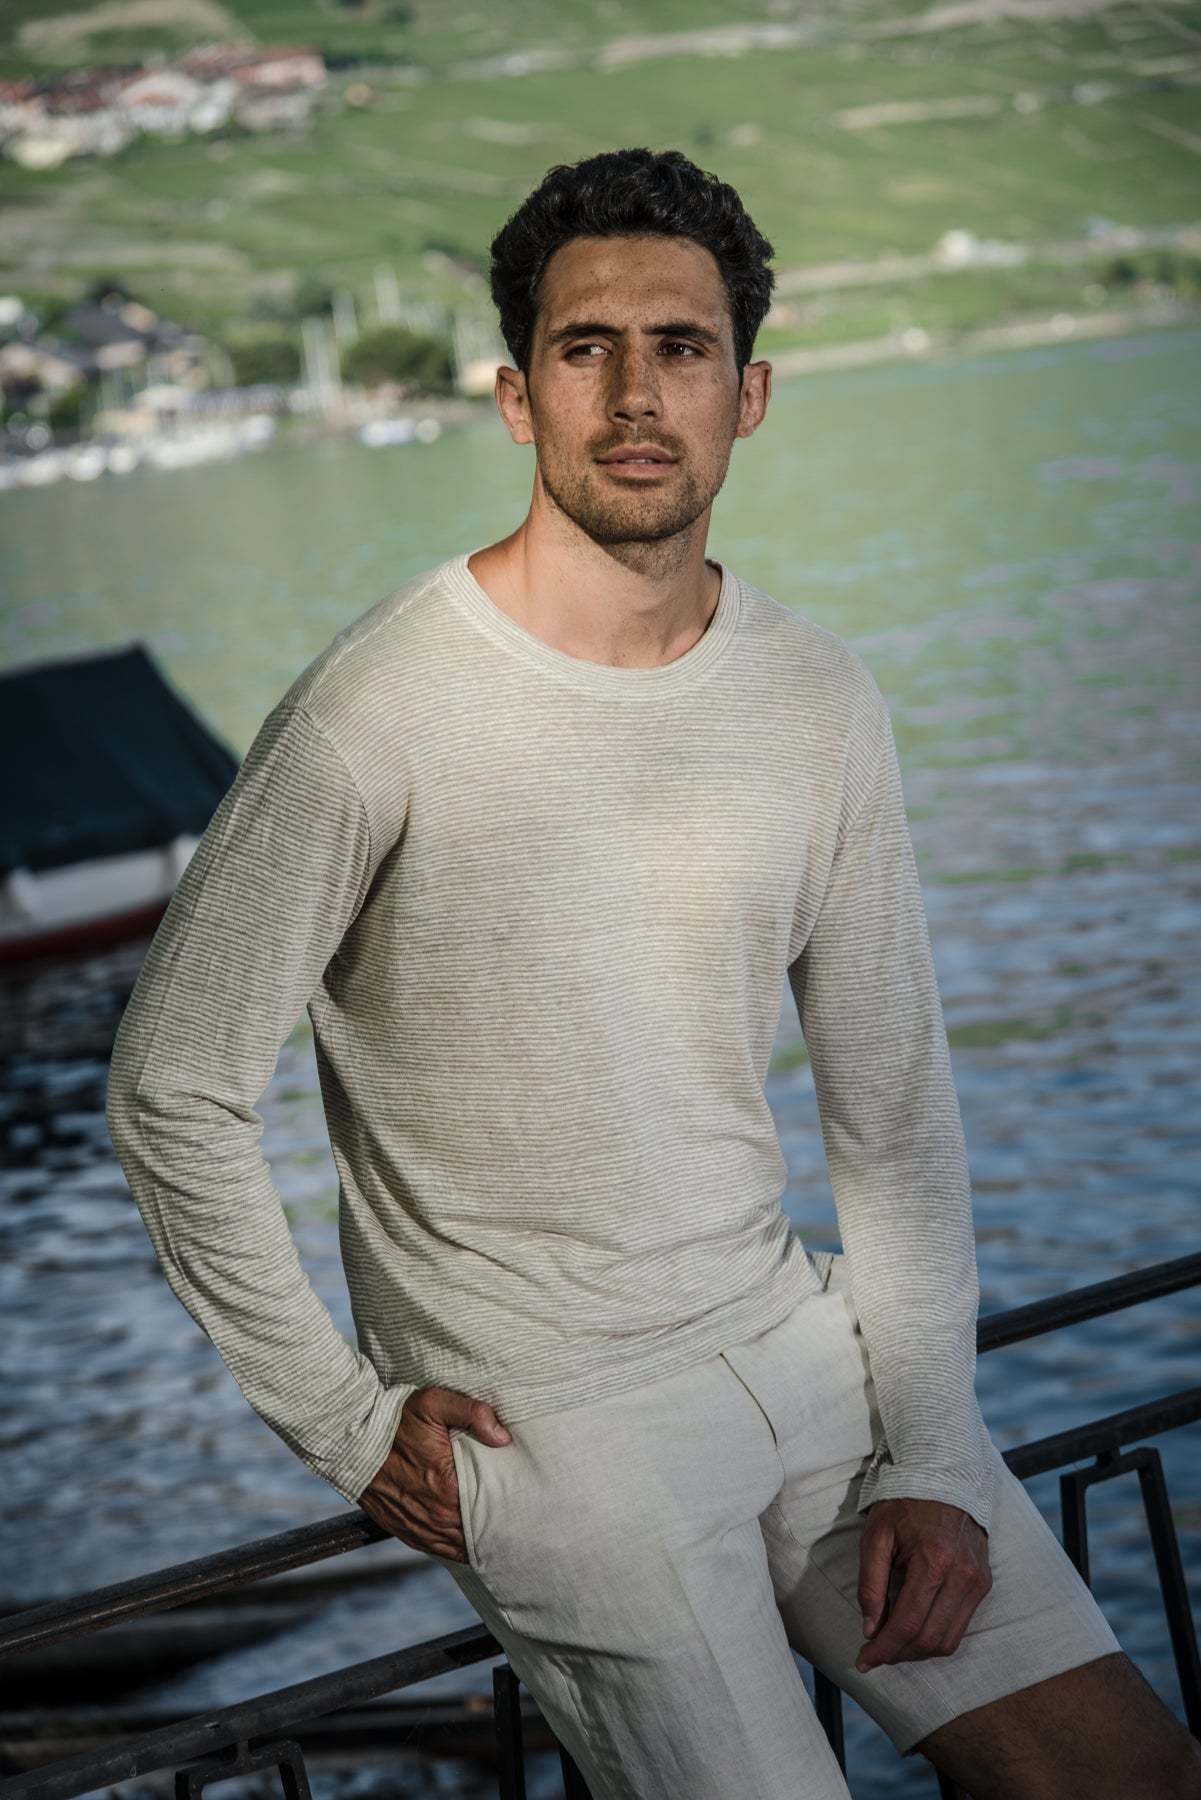 Elié long-sleeved t-shirt in soft-striped jersey (creme)